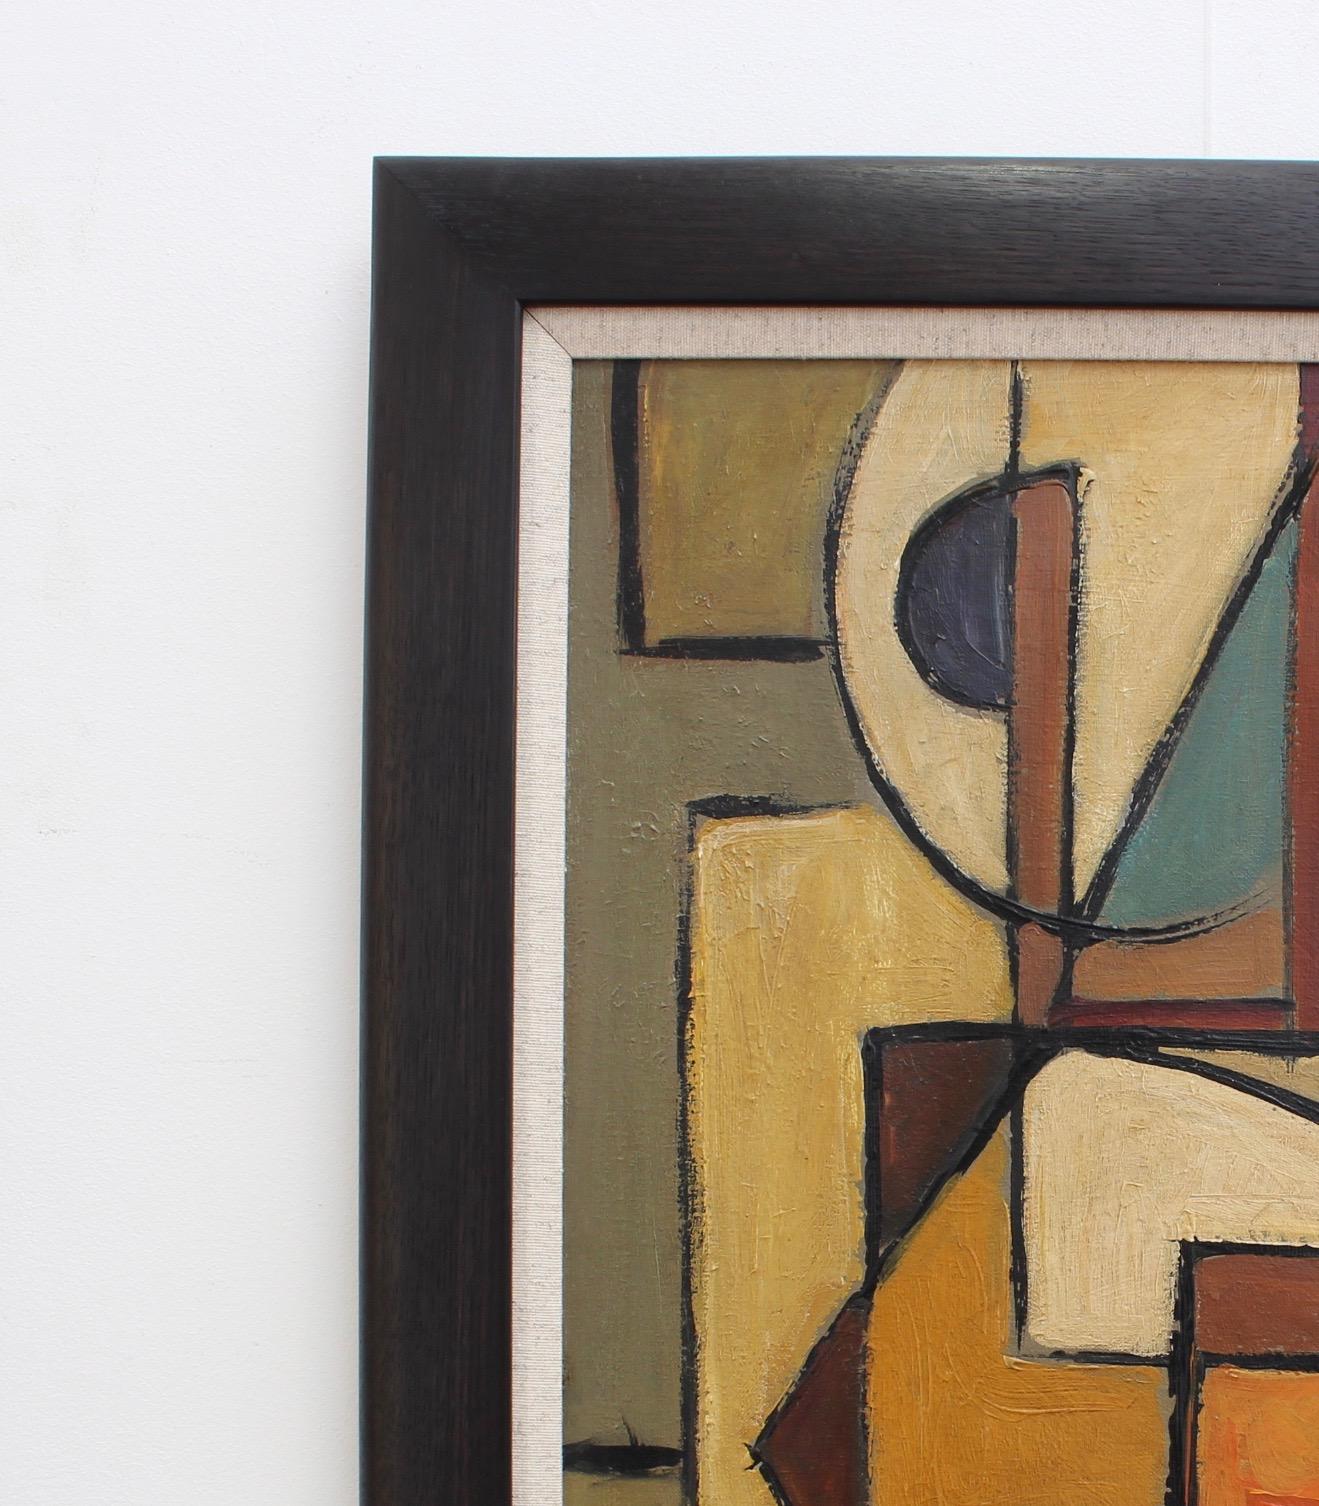 'Abstract Composition in Colour', oil on canvas, signed by an artist with the name Lemaire (circa 1960s). Bold lines, geometric shapes and vivid colours are combined to emerge as an extraordinary work of art. Clearly influenced by the works of